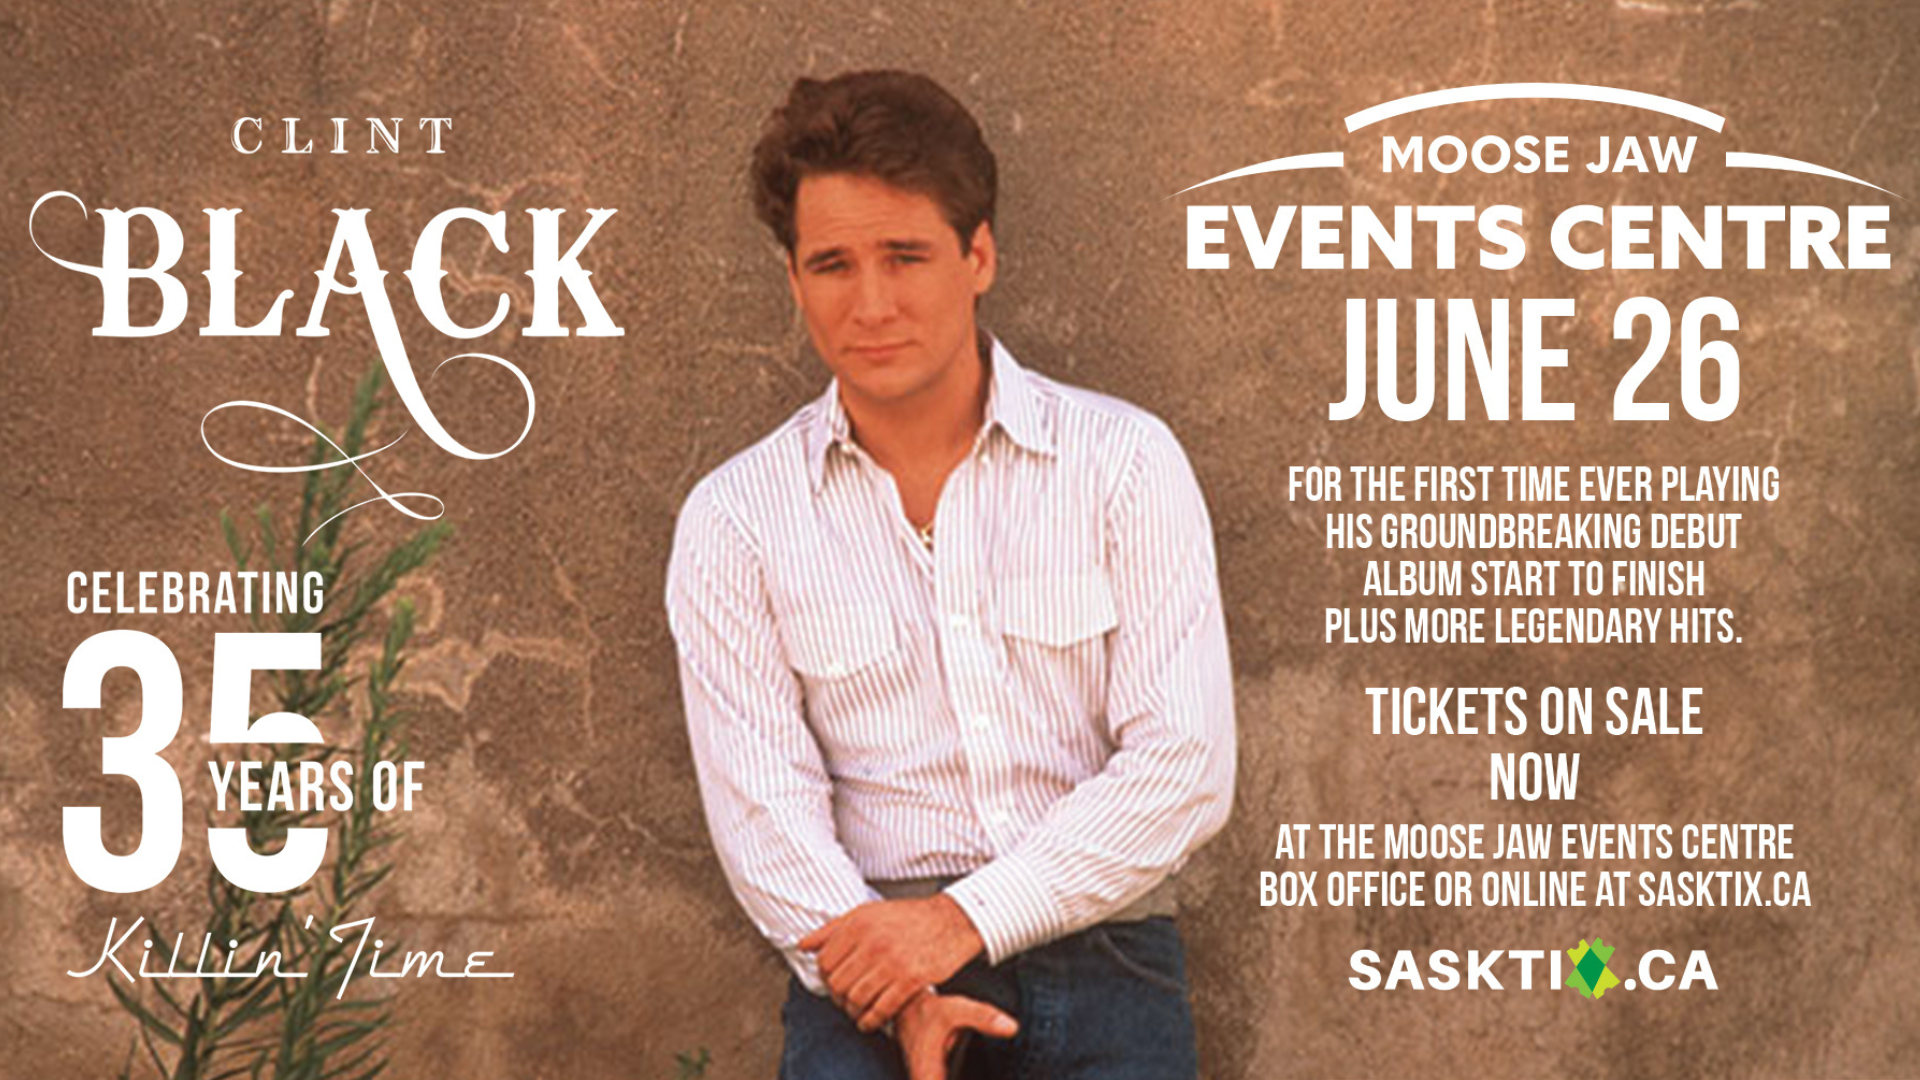 More Info for Clint Black coming to the Moose Jaw Events Centre